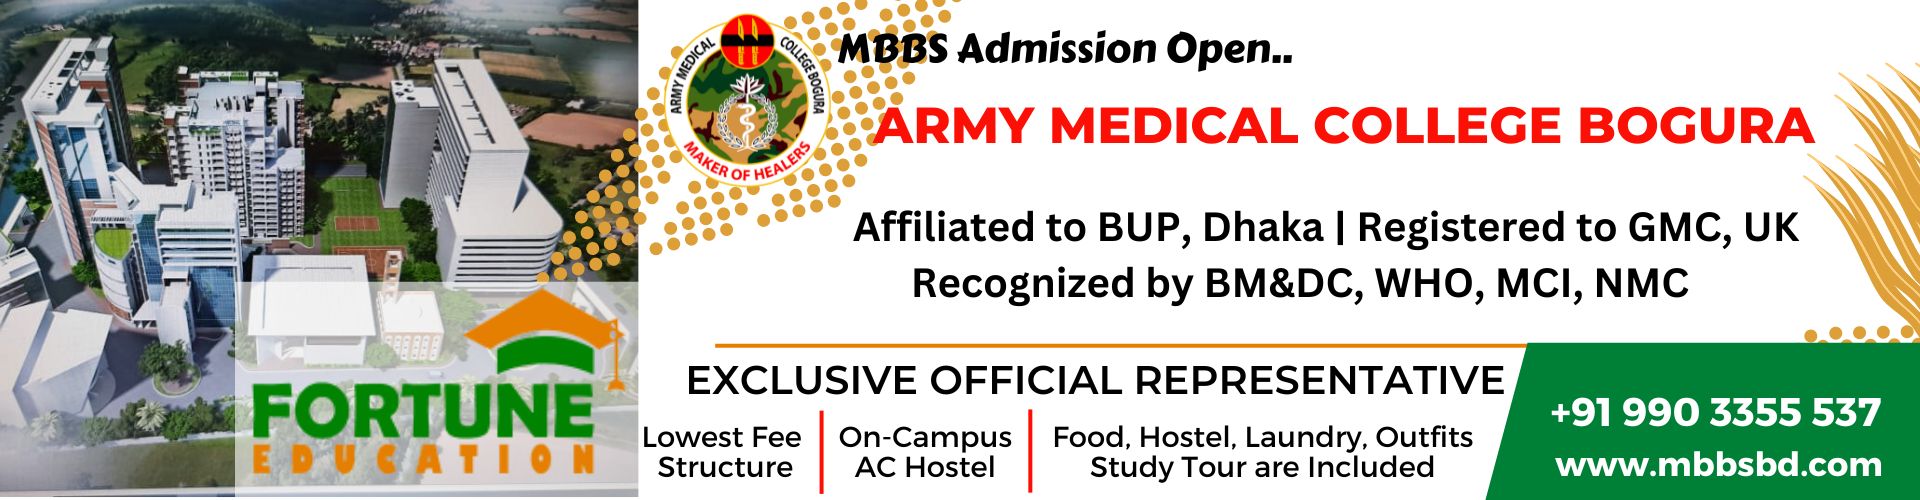 Army Medical College Bogura MBBS Fees Structure